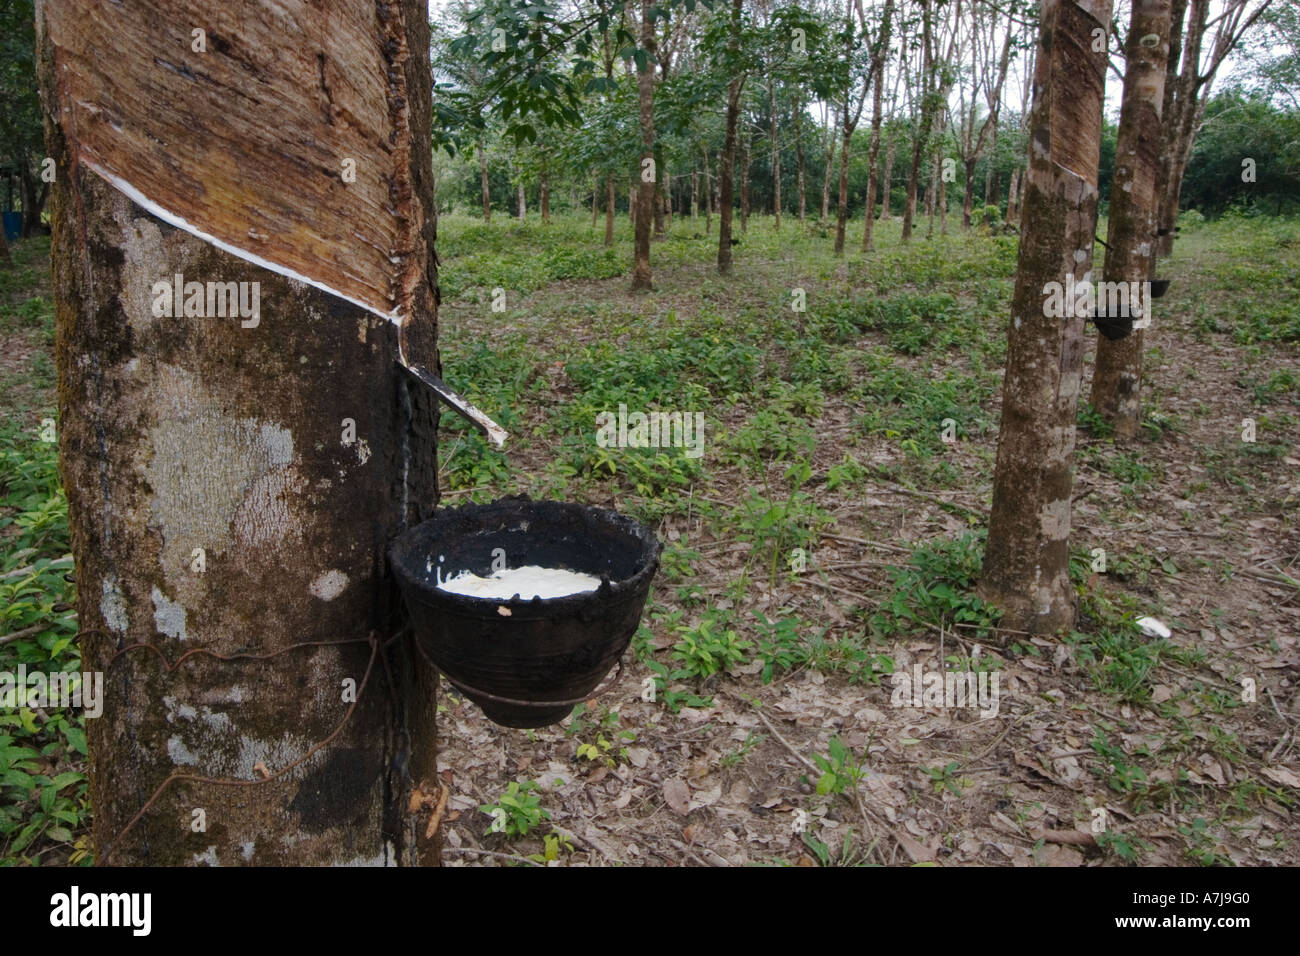 Rubber sap is harvested in the village of Tung Nang Dam located near the North Andaman Sea THAILAND Stock Photo